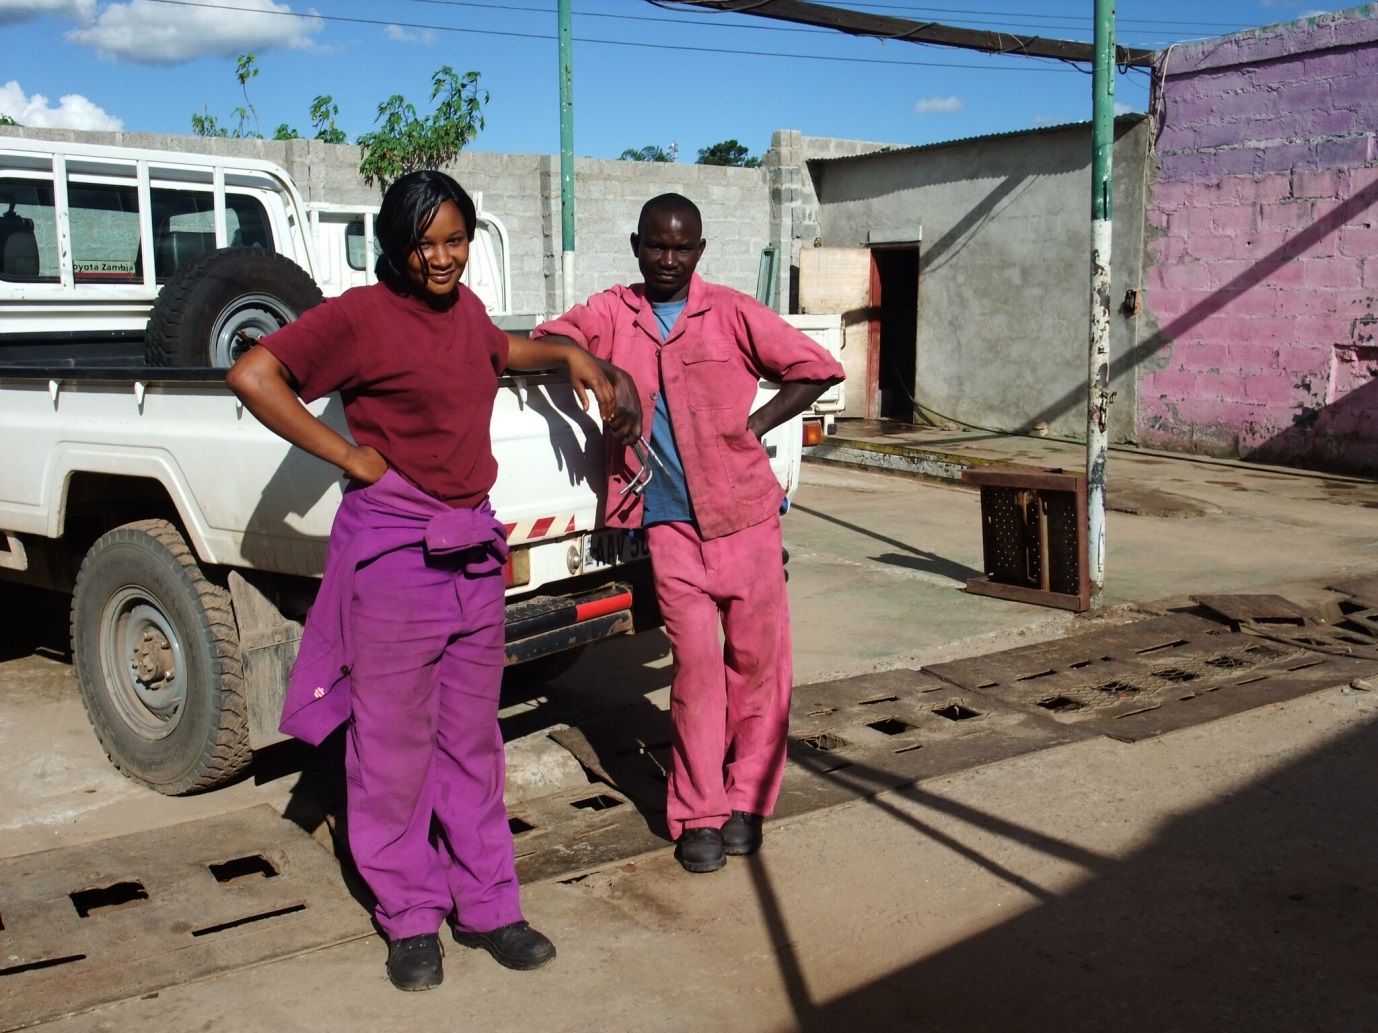 In modern day Zambia, women can now as car mechanic or other roles generally dominated by men Photo Credit: Alice Evans